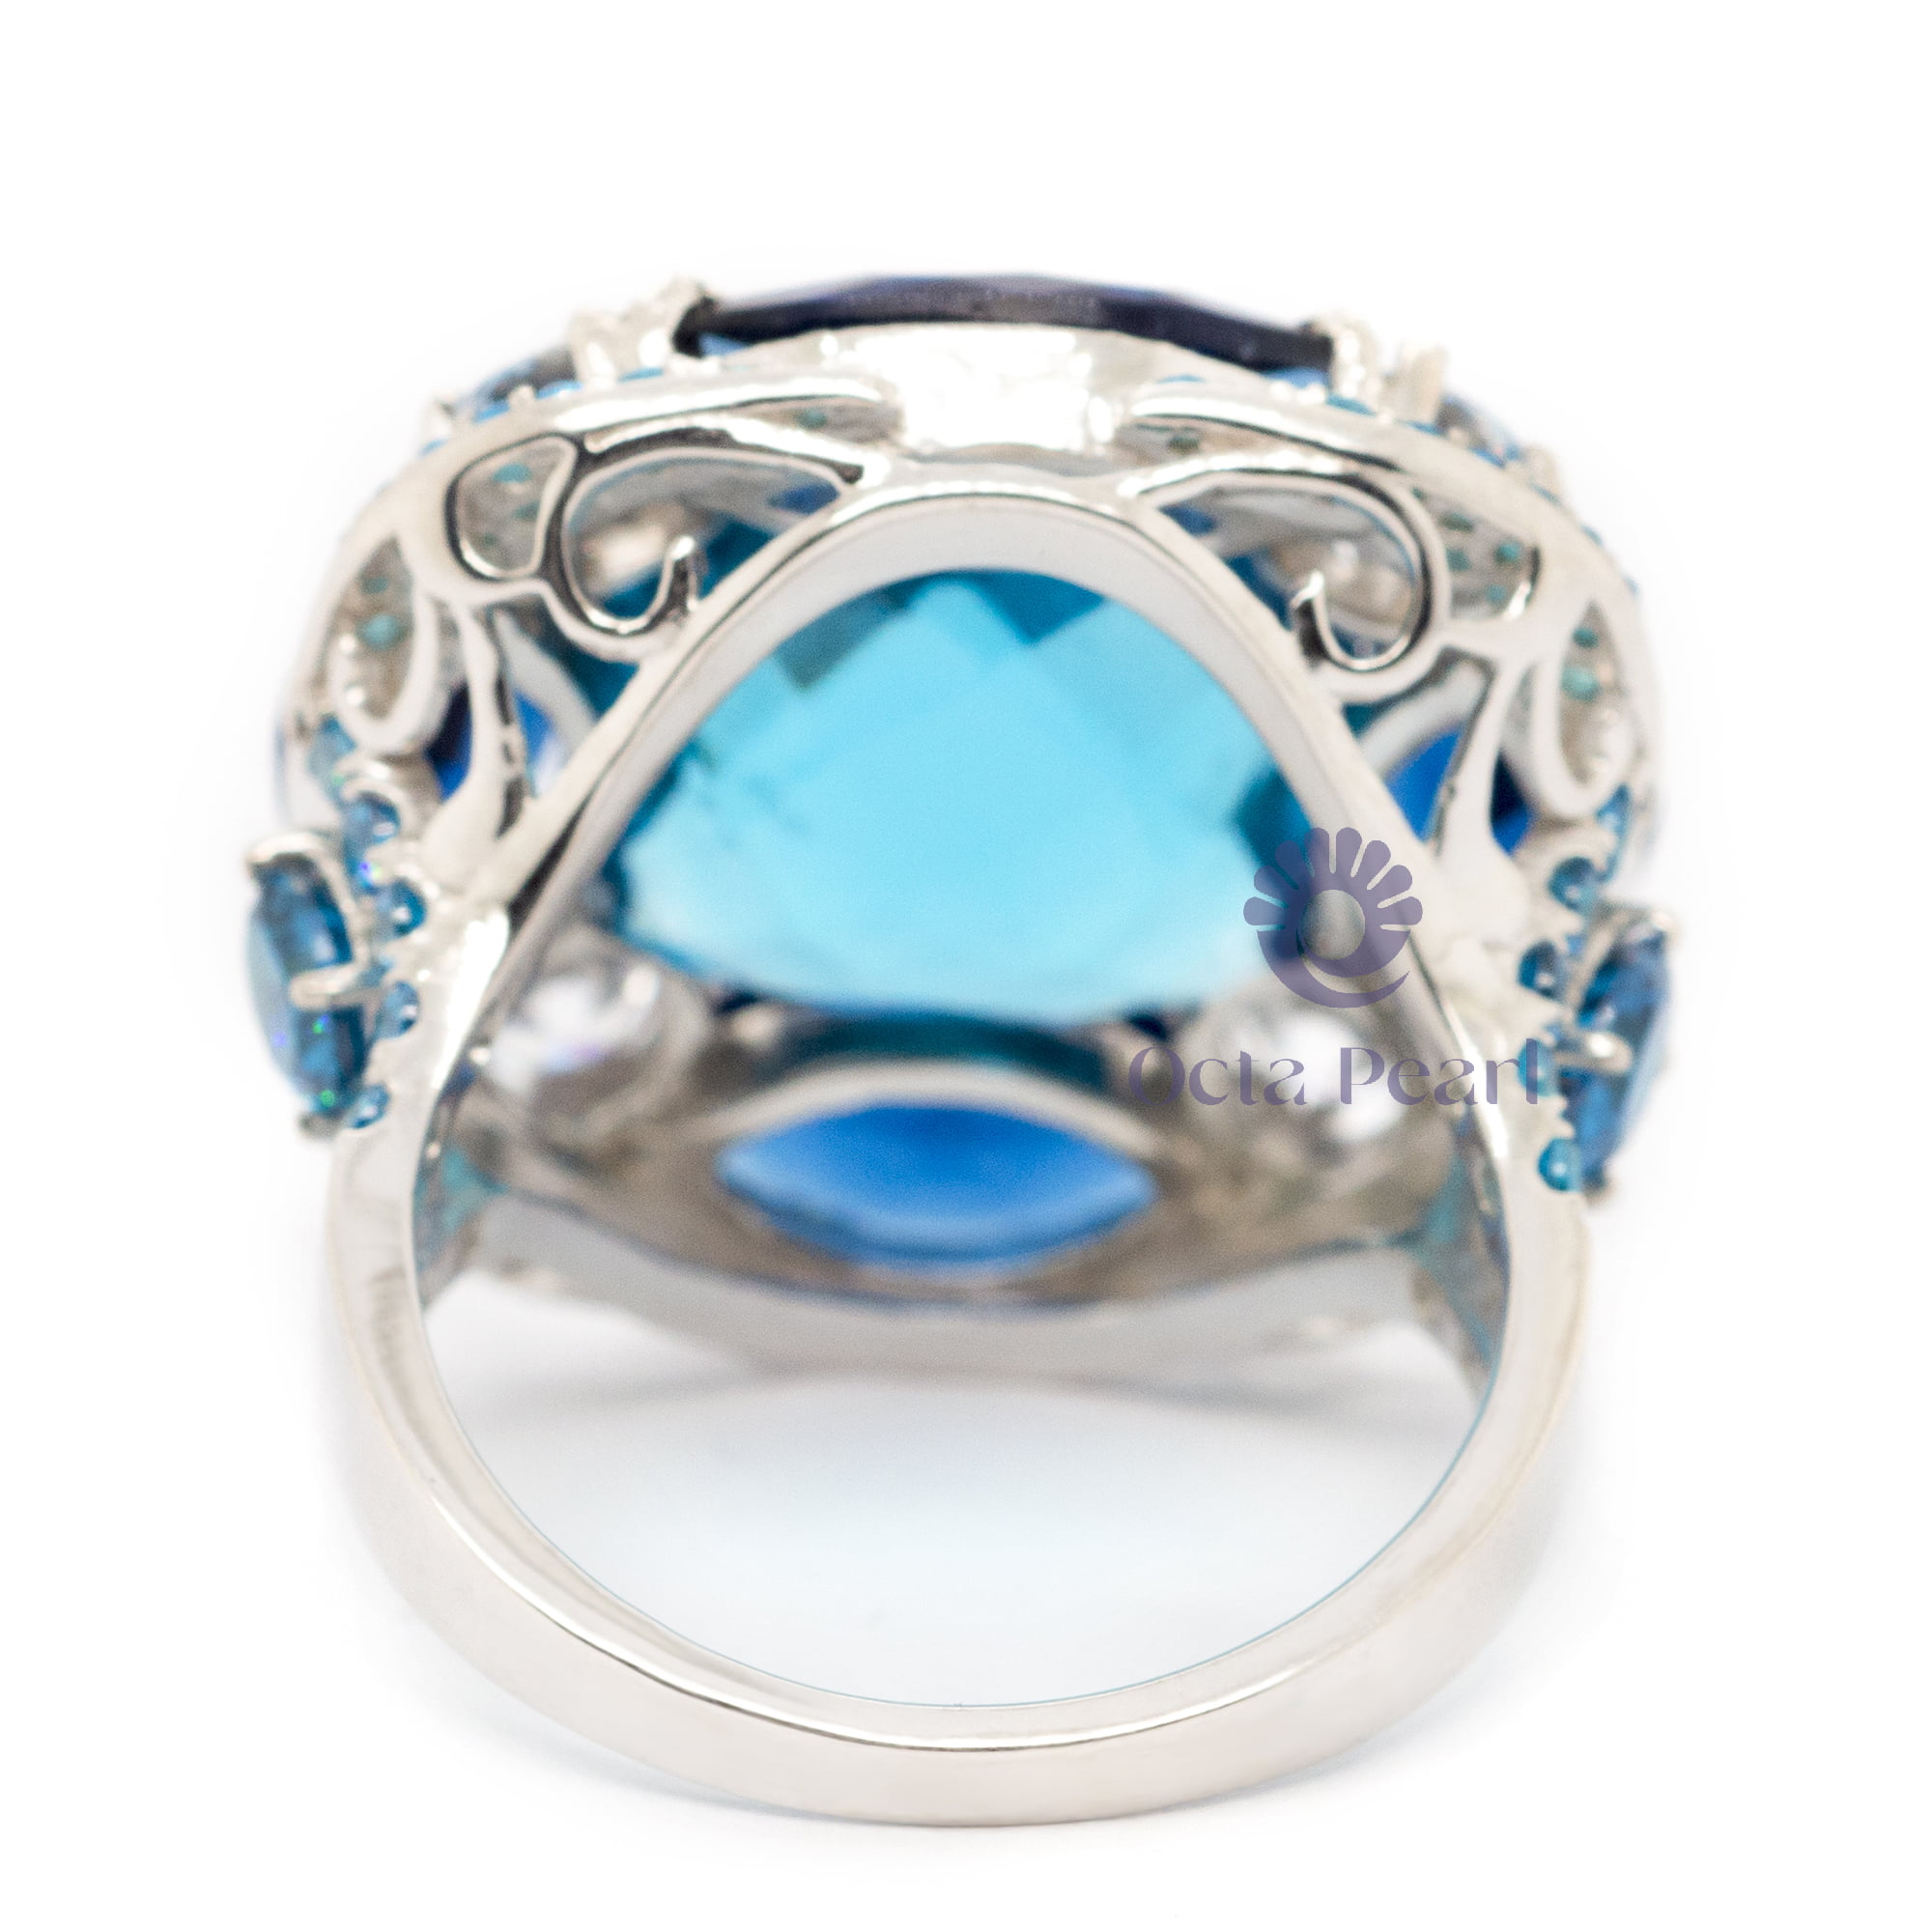 Aqua Cushion & Round With Blue Sapphire Marquise CZ Stone Cocktail Ring (21 8/9 TCW)